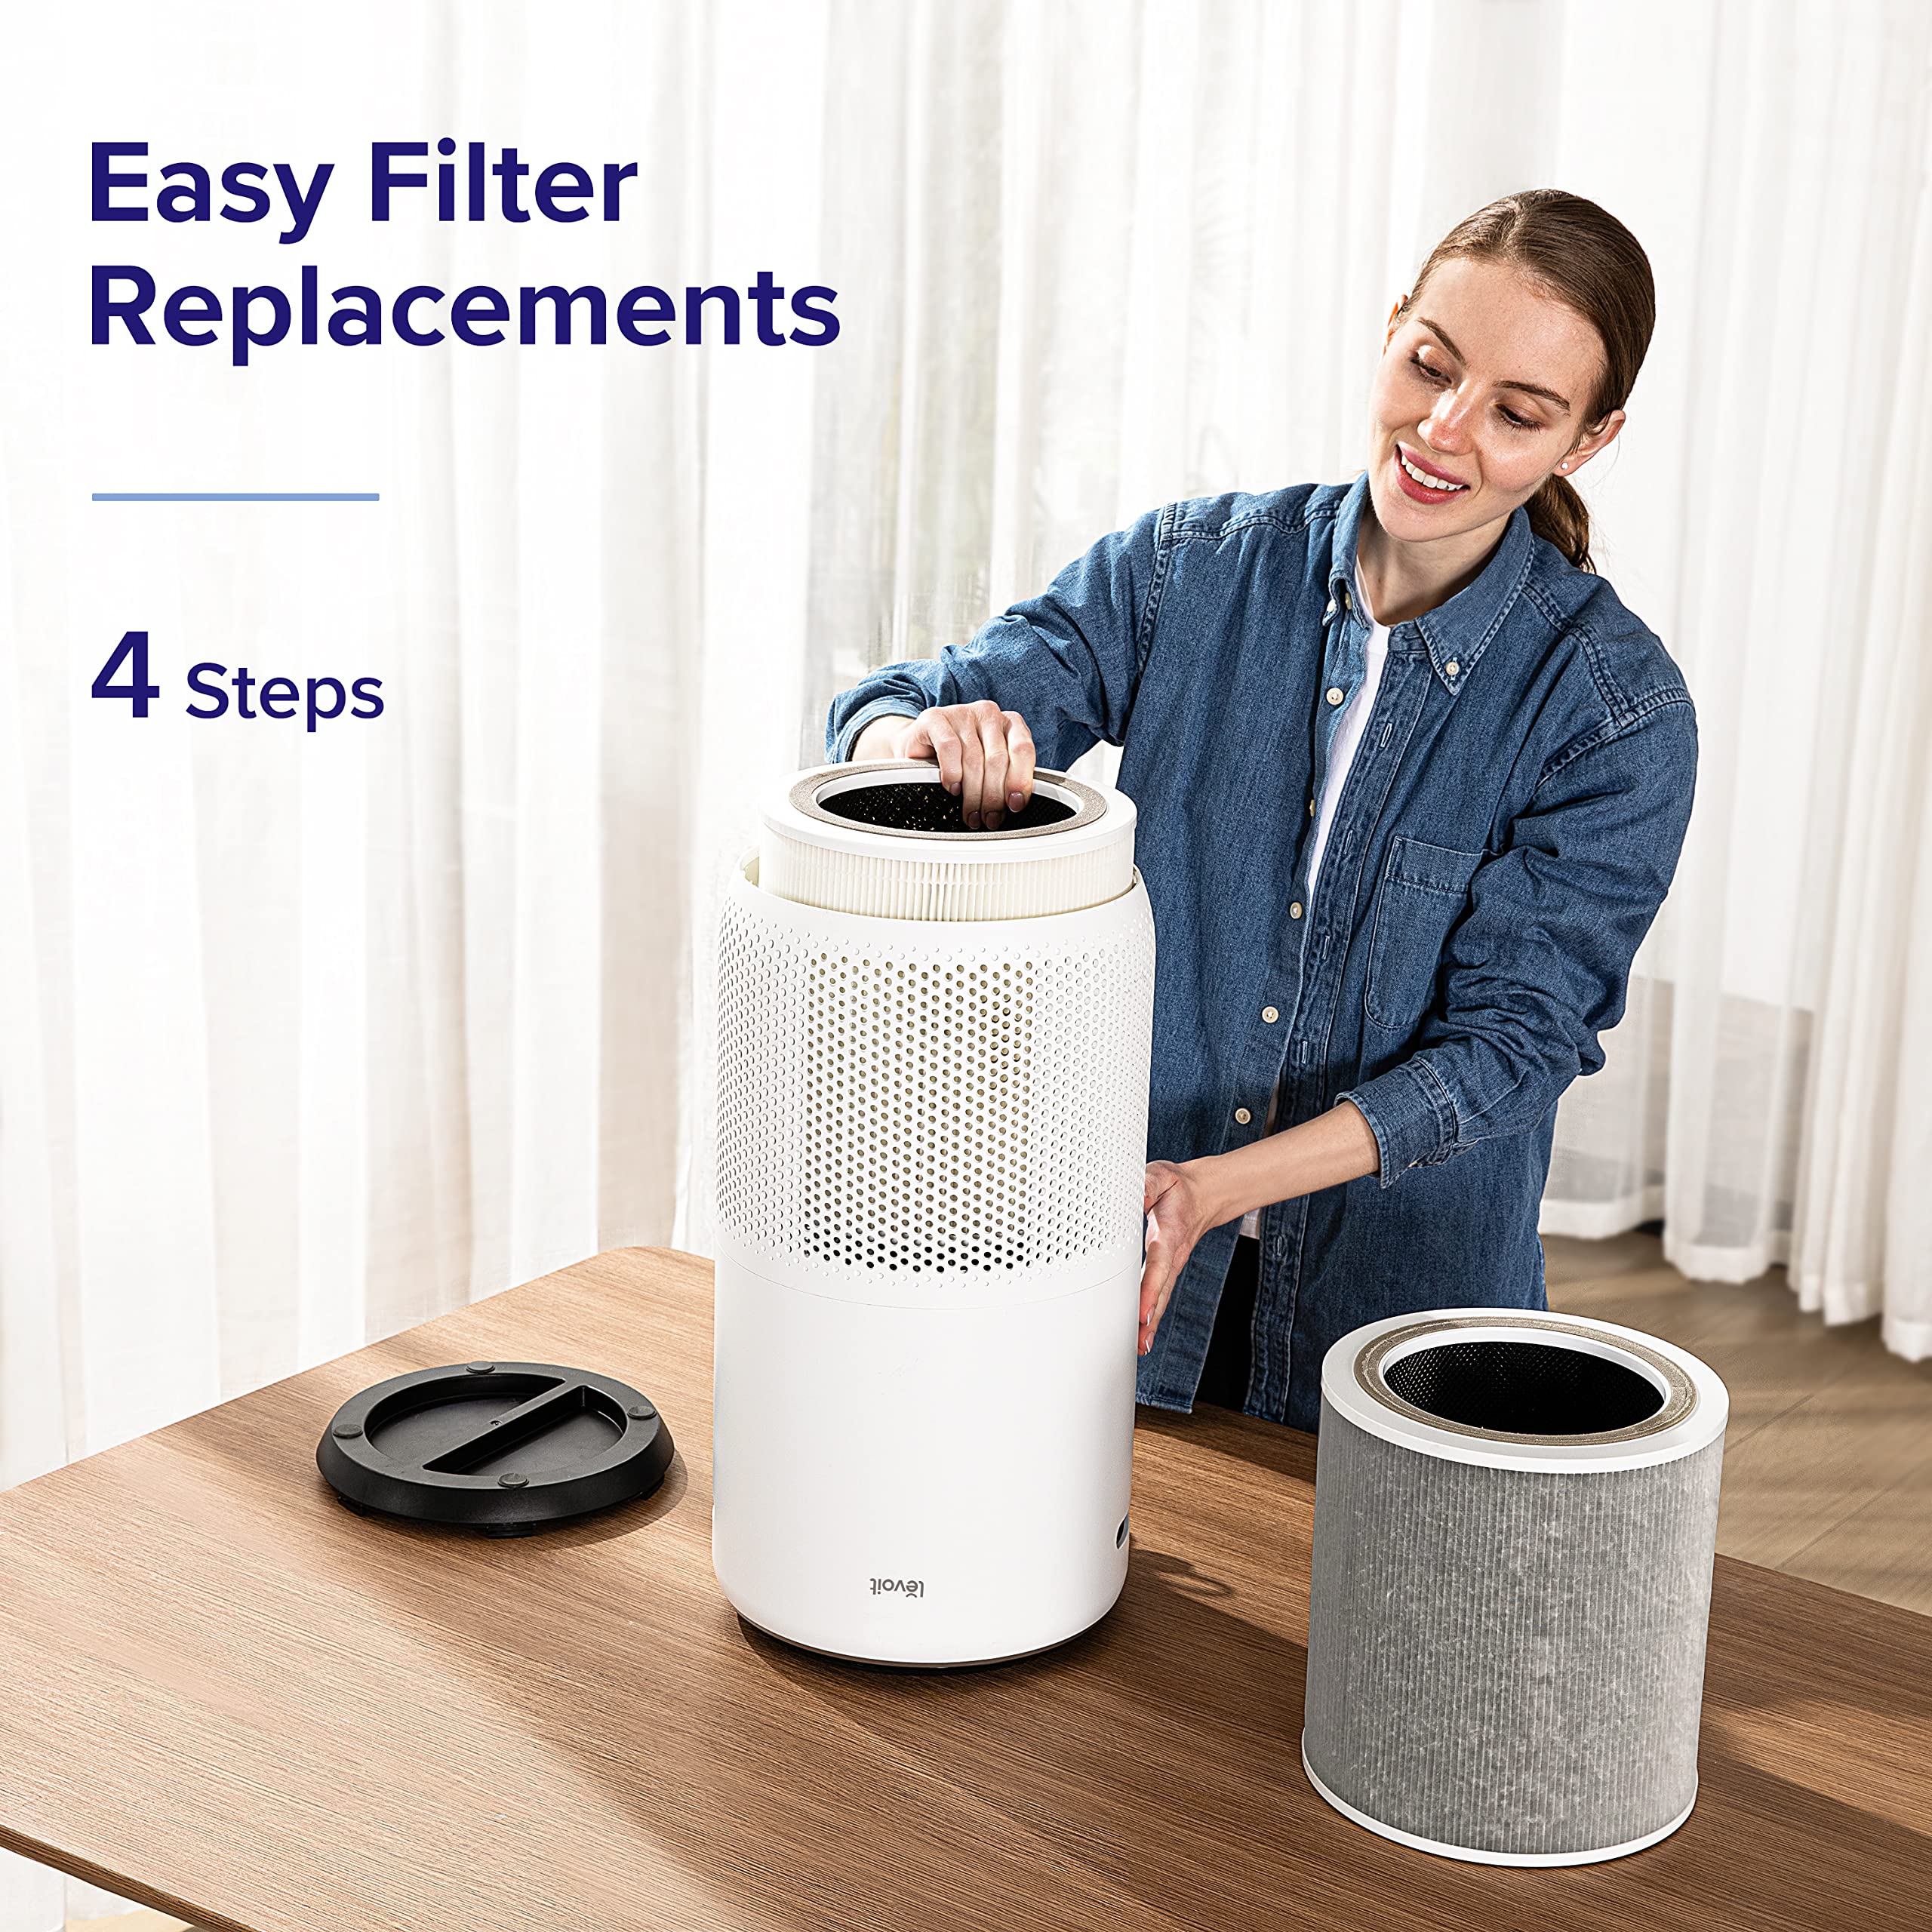 LEVOIT Air Purifiers for Home Large Room Up to 1980 Ft² in 1 Hr With Air Quality Monitor, Smart WiFi and Auto Mode, HEPA Filter Captures Pet Allergies, Smoke, Dust, Pollen, Core 400S, White